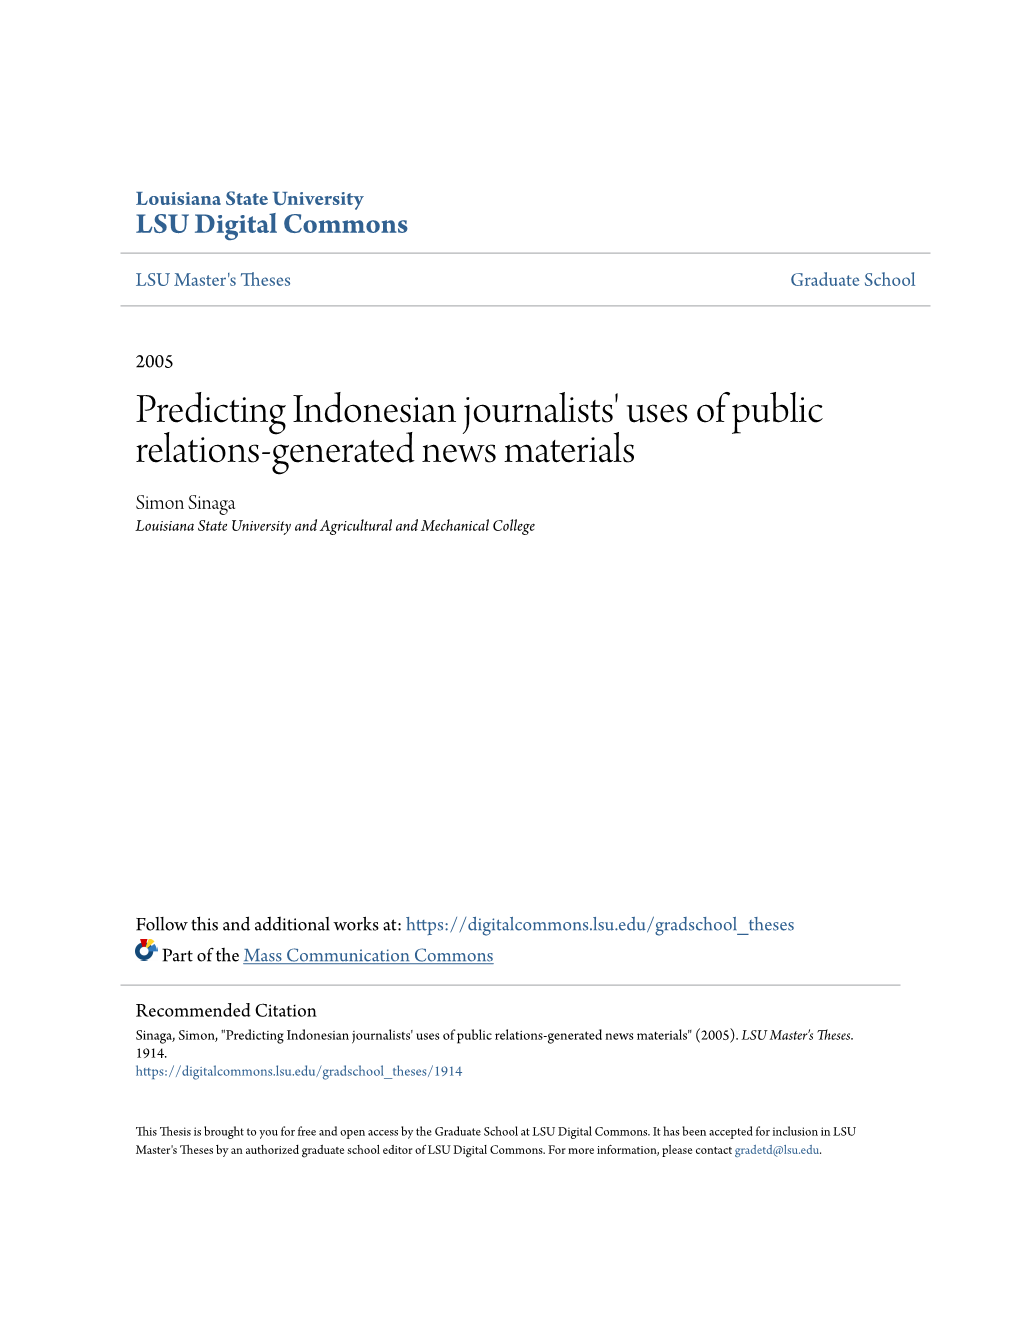 Predicting Indonesian Journalists' Uses of Public Relations-Generated News Materials Simon Sinaga Louisiana State University and Agricultural and Mechanical College